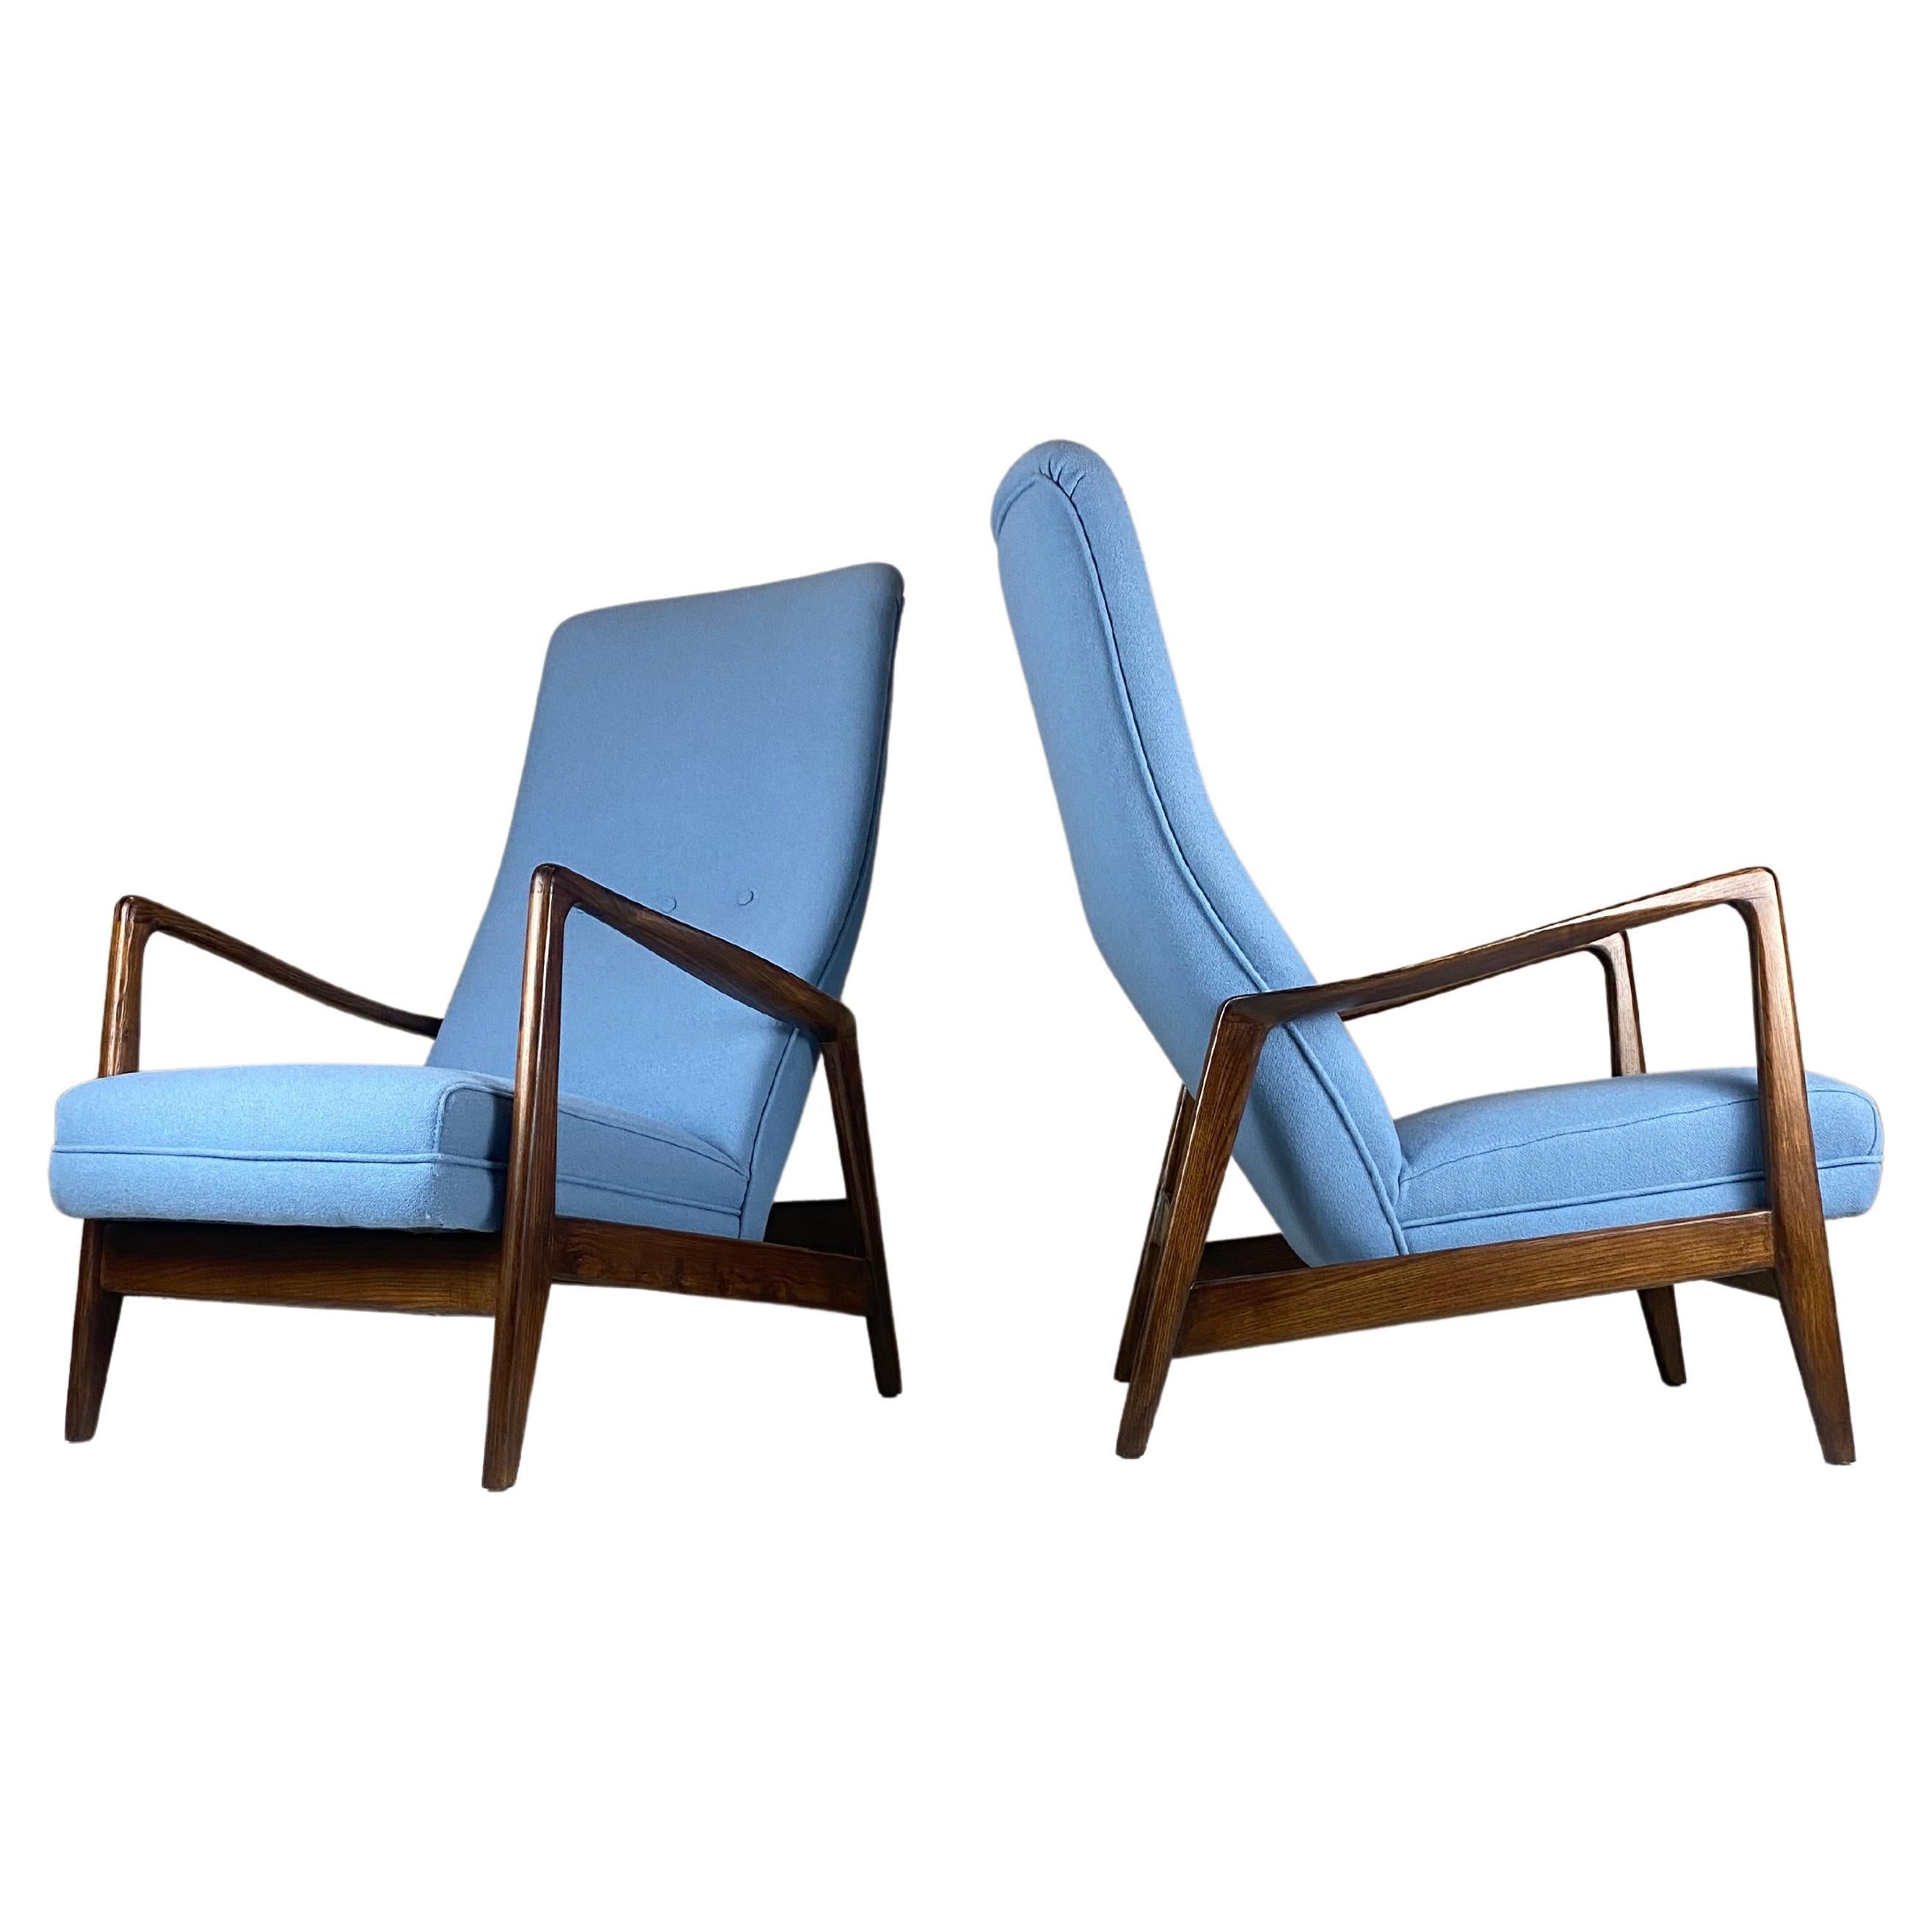 Pair of Cassina no. 829 Highback Lounge Chairs by Gio Ponti, Parco dei Principe